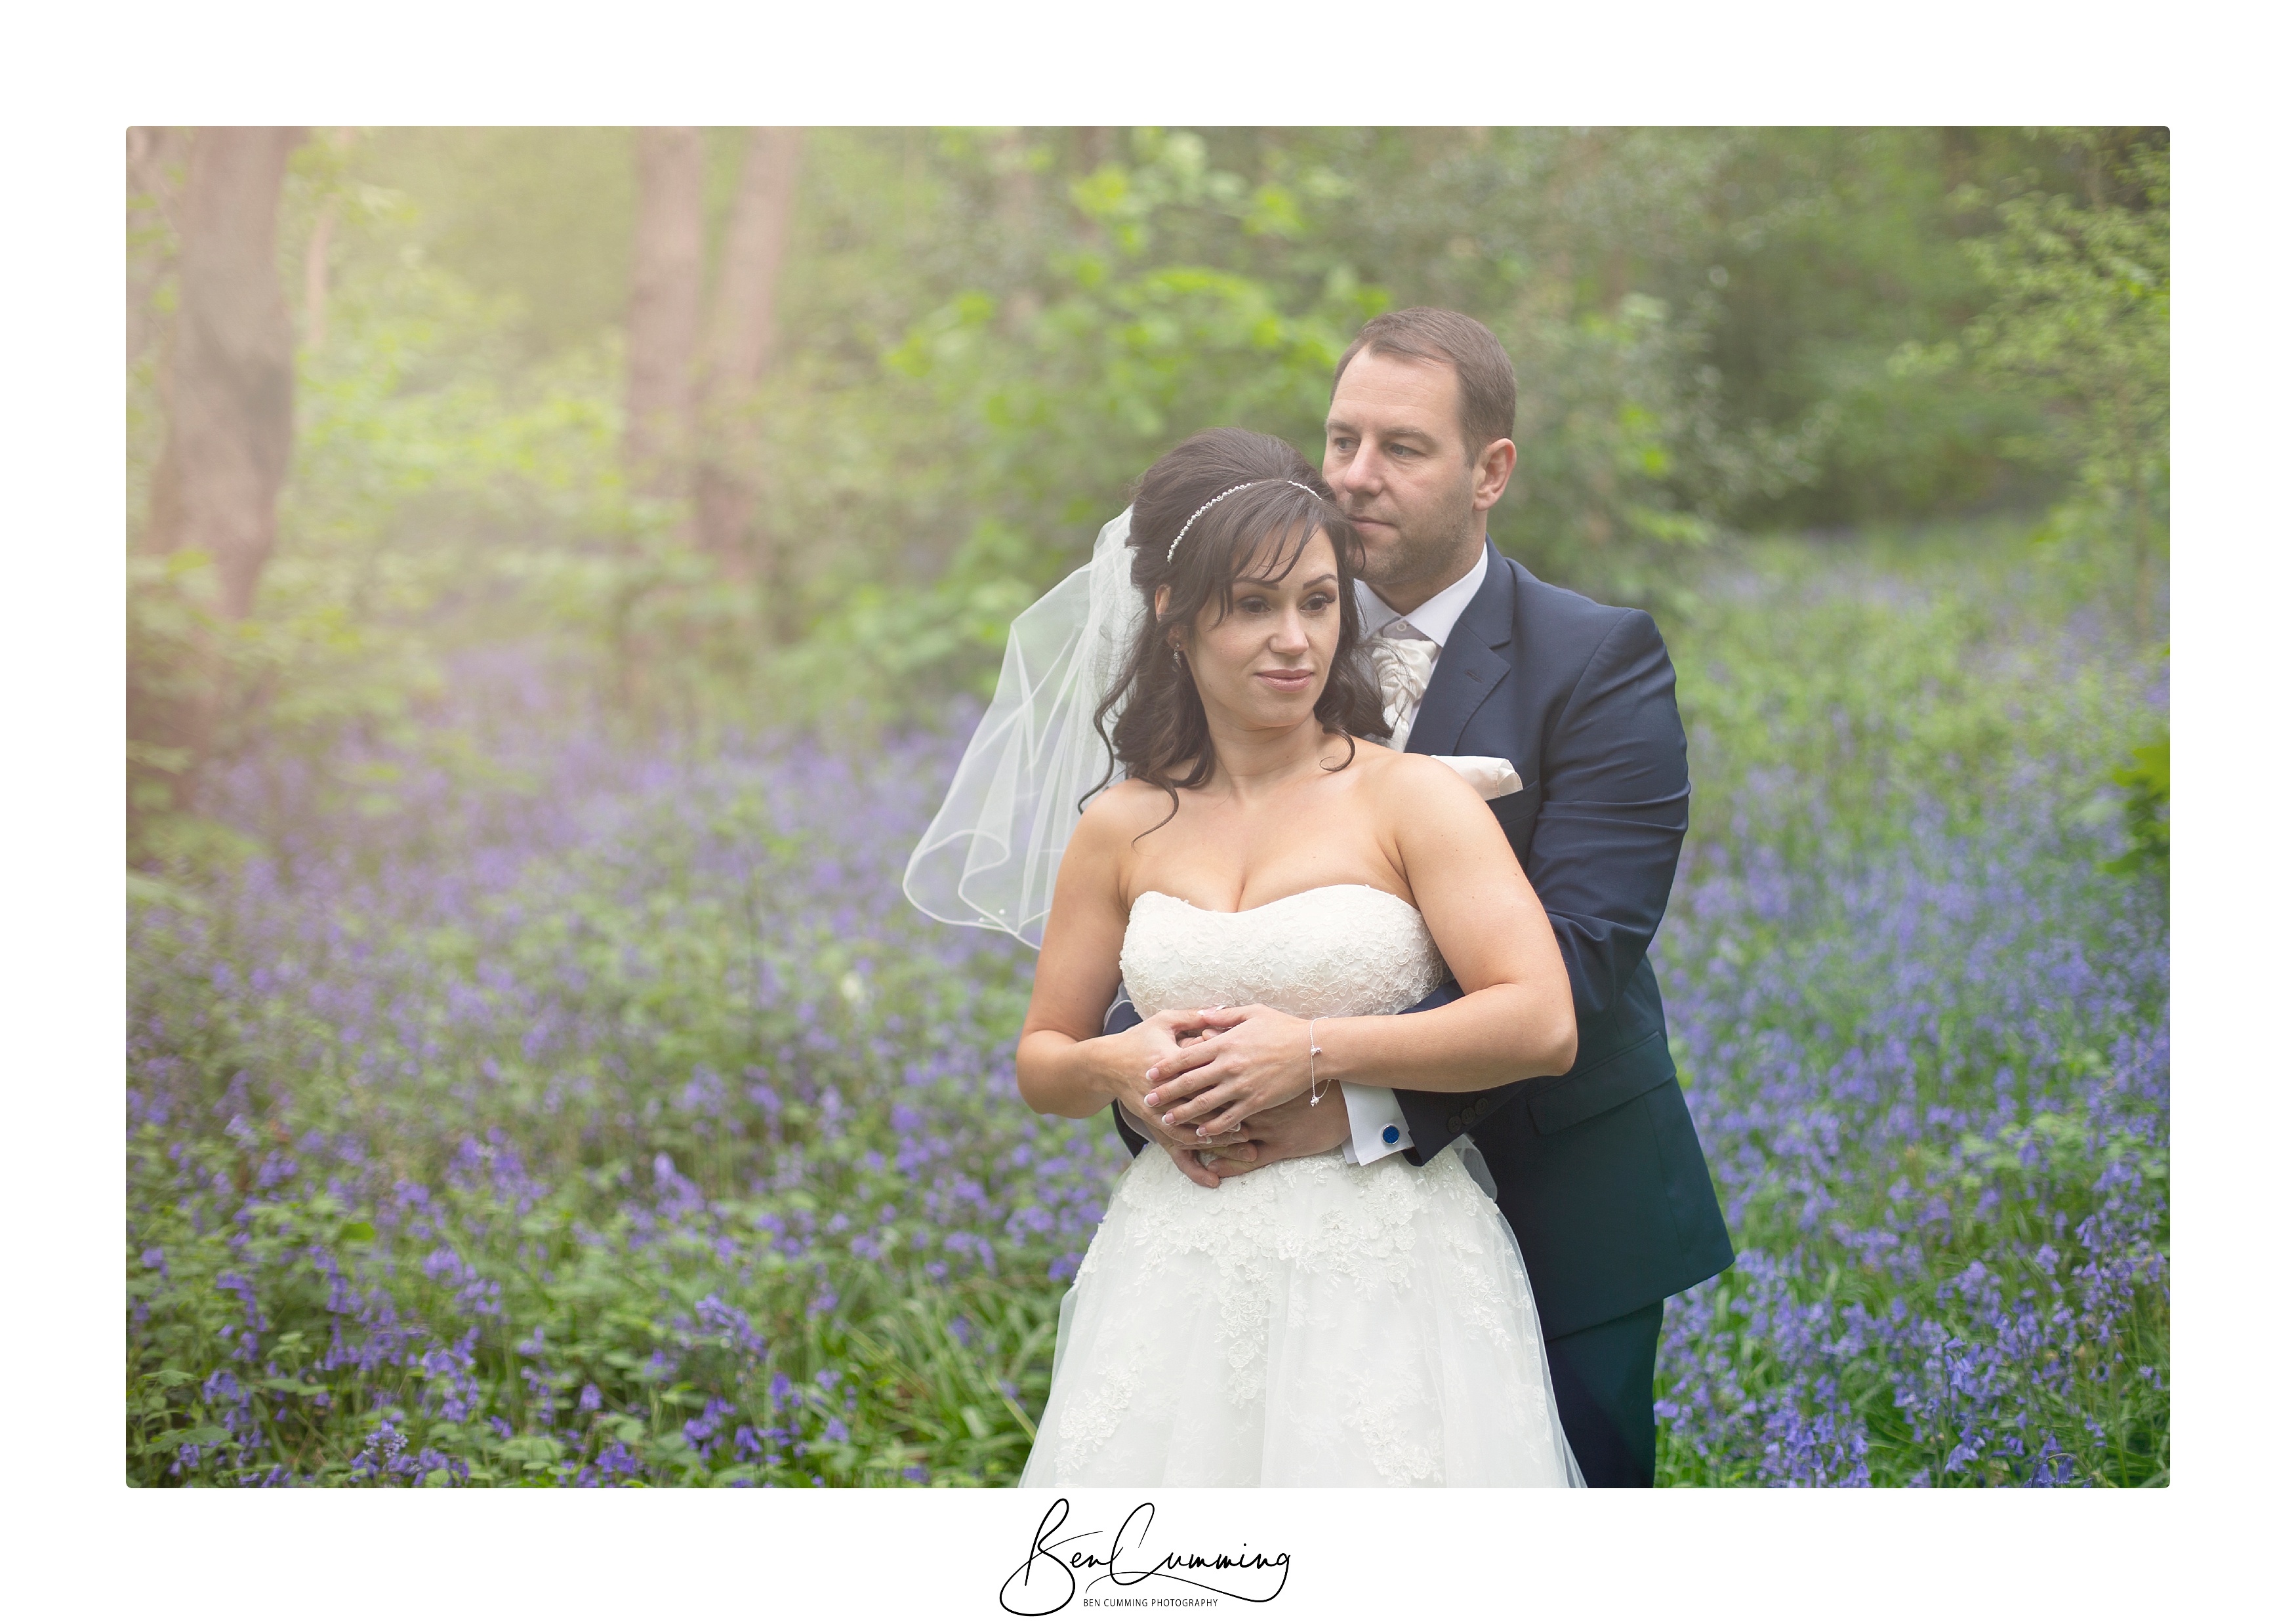 Sarah and Tim embracing in bluebells.